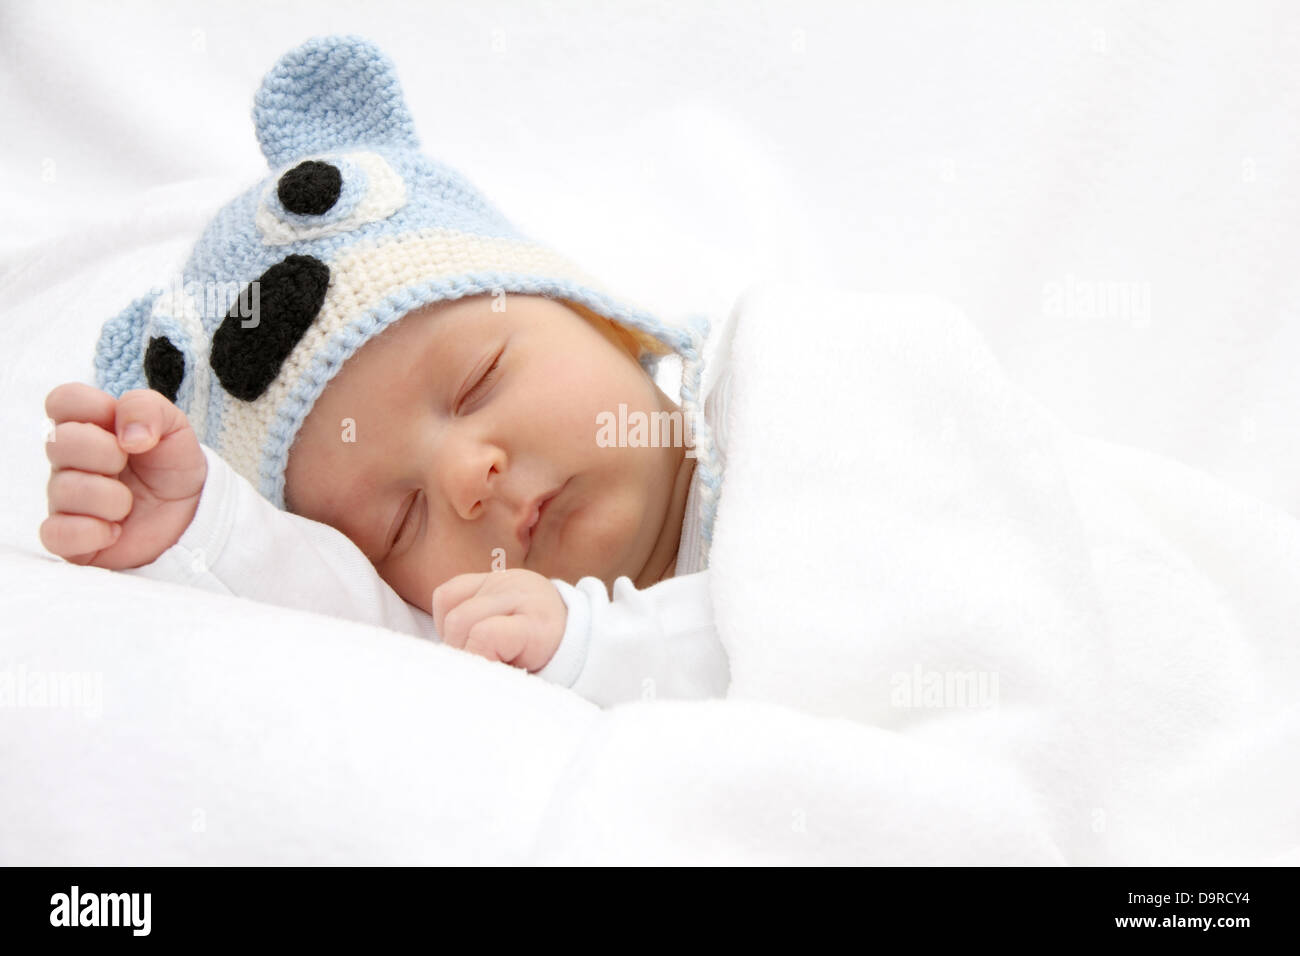 Sleeping baby with knitted hat Stock Photo